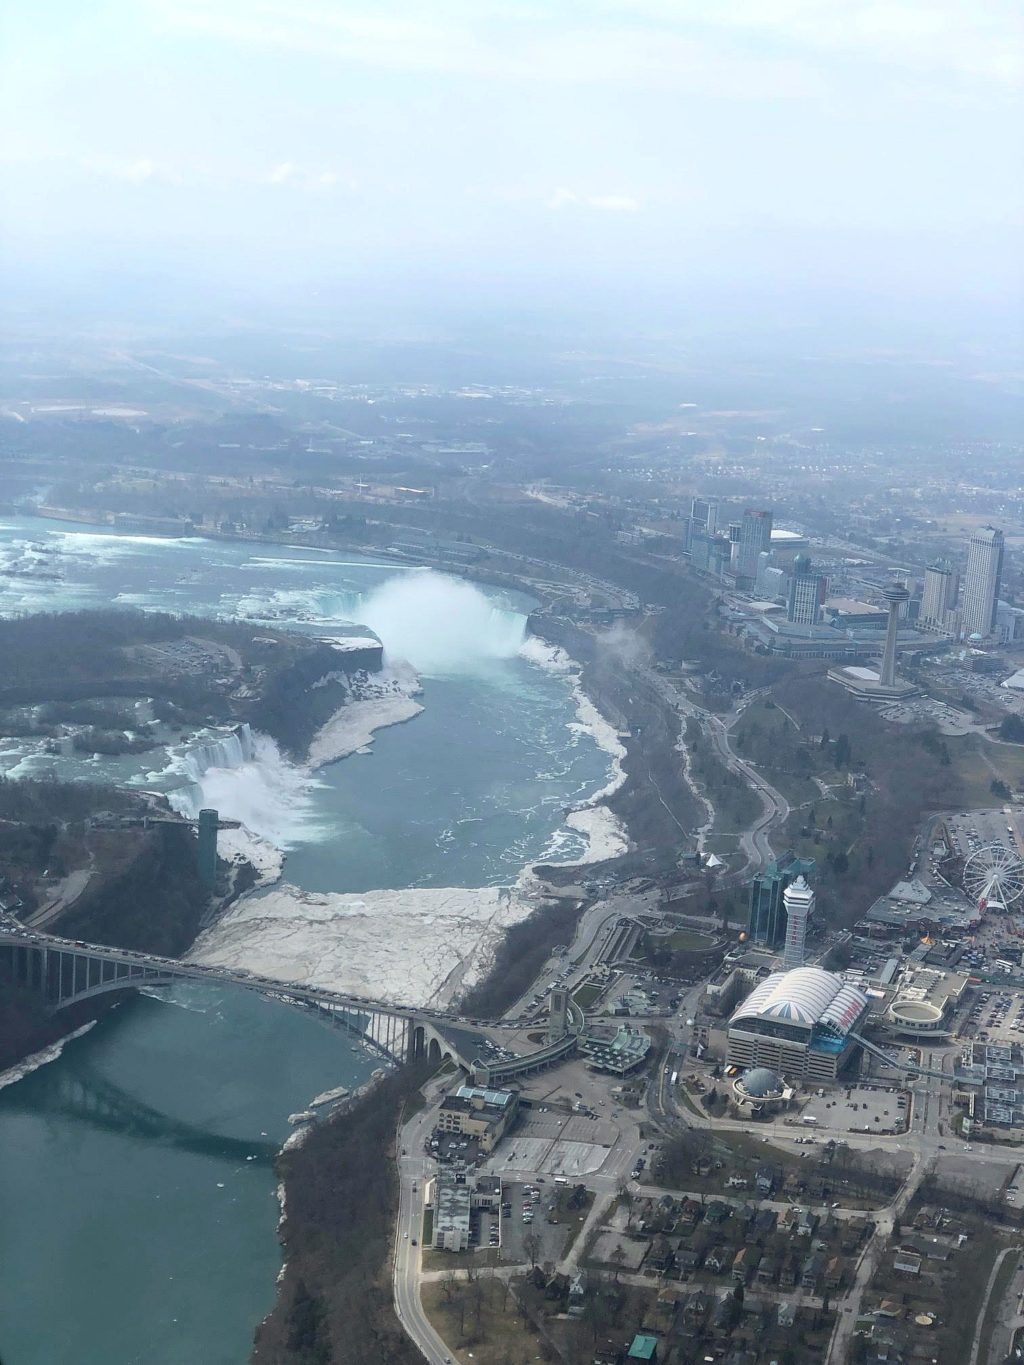 Another view of Niagara Falls, and the Rainbow Bridge.